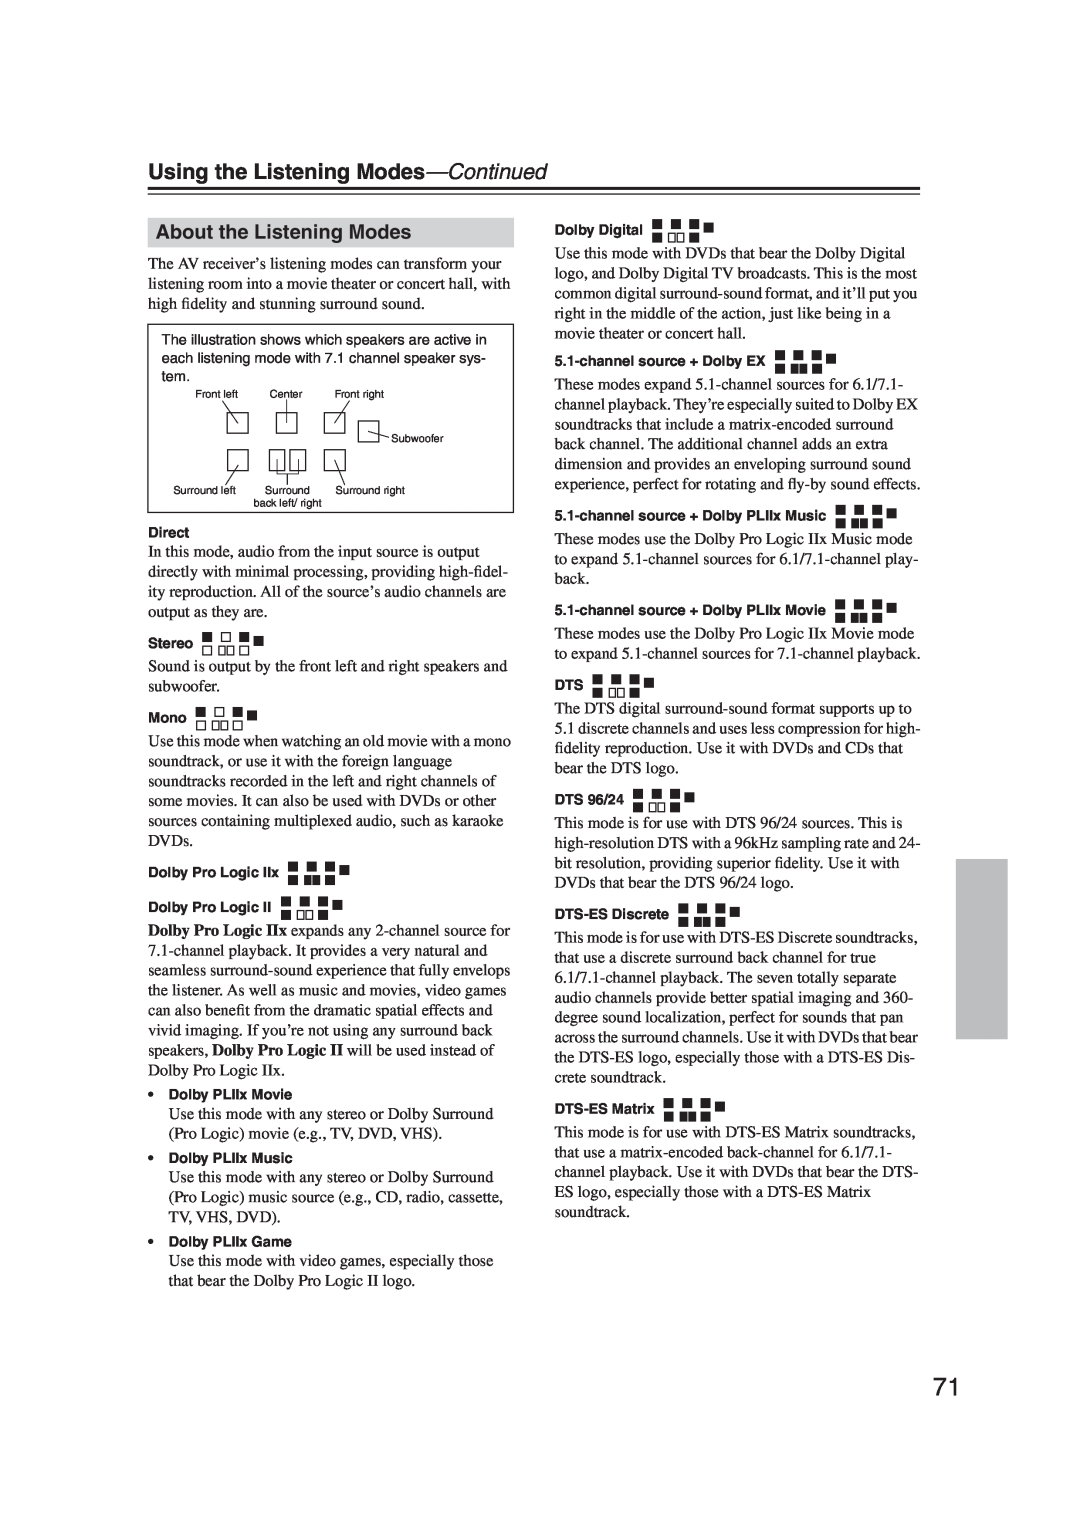 Onkyo S5100 instruction manual About the Listening Modes, Using the Listening Modes—Continued 